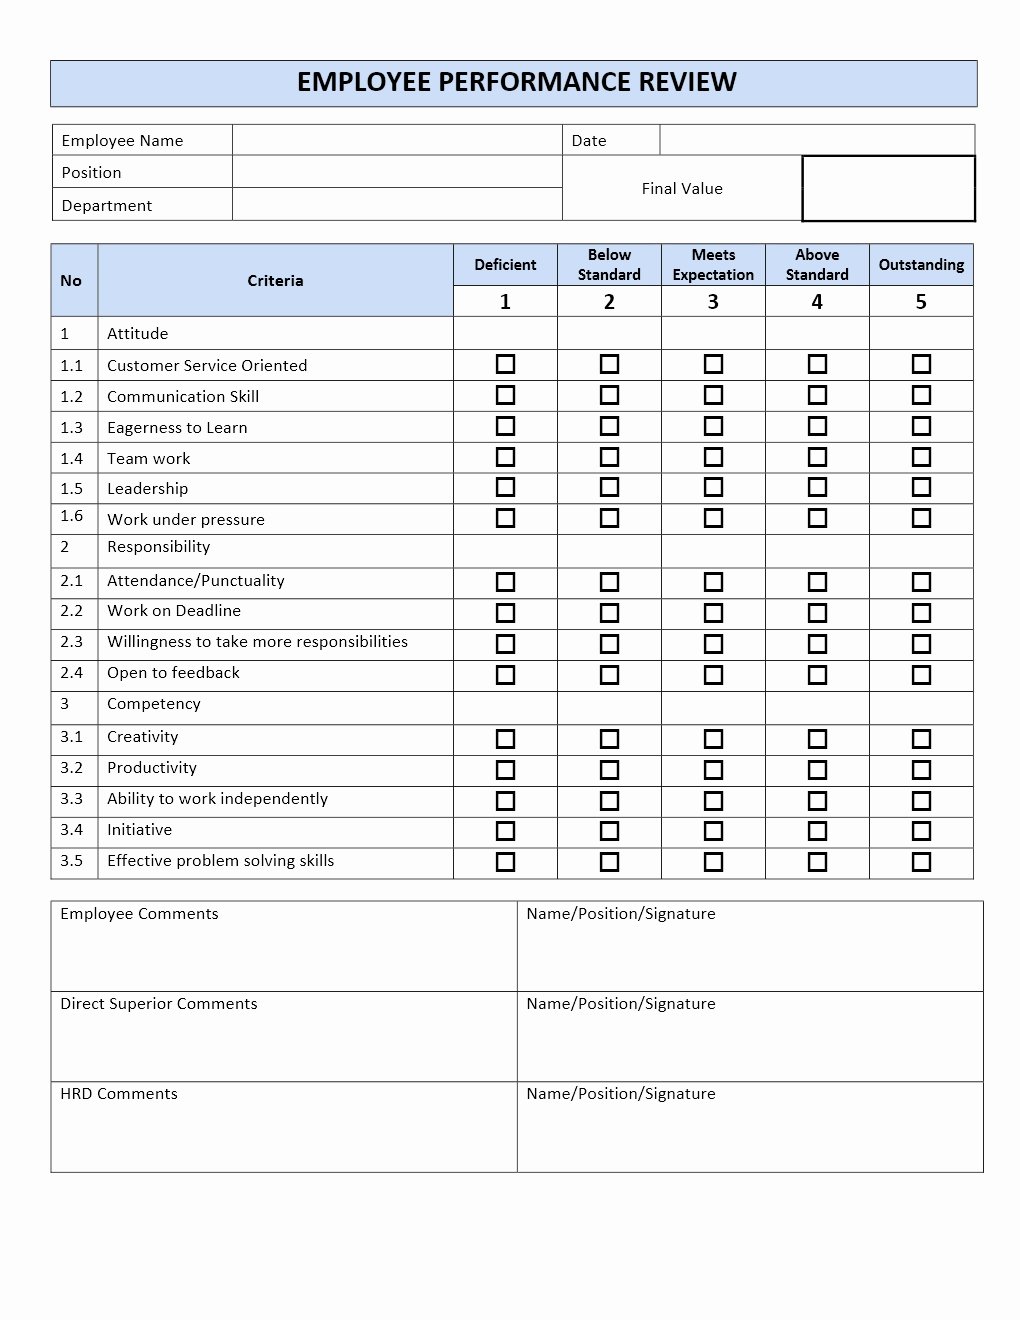 Employee Performance Review Template Inspirational Employee Performance Review form